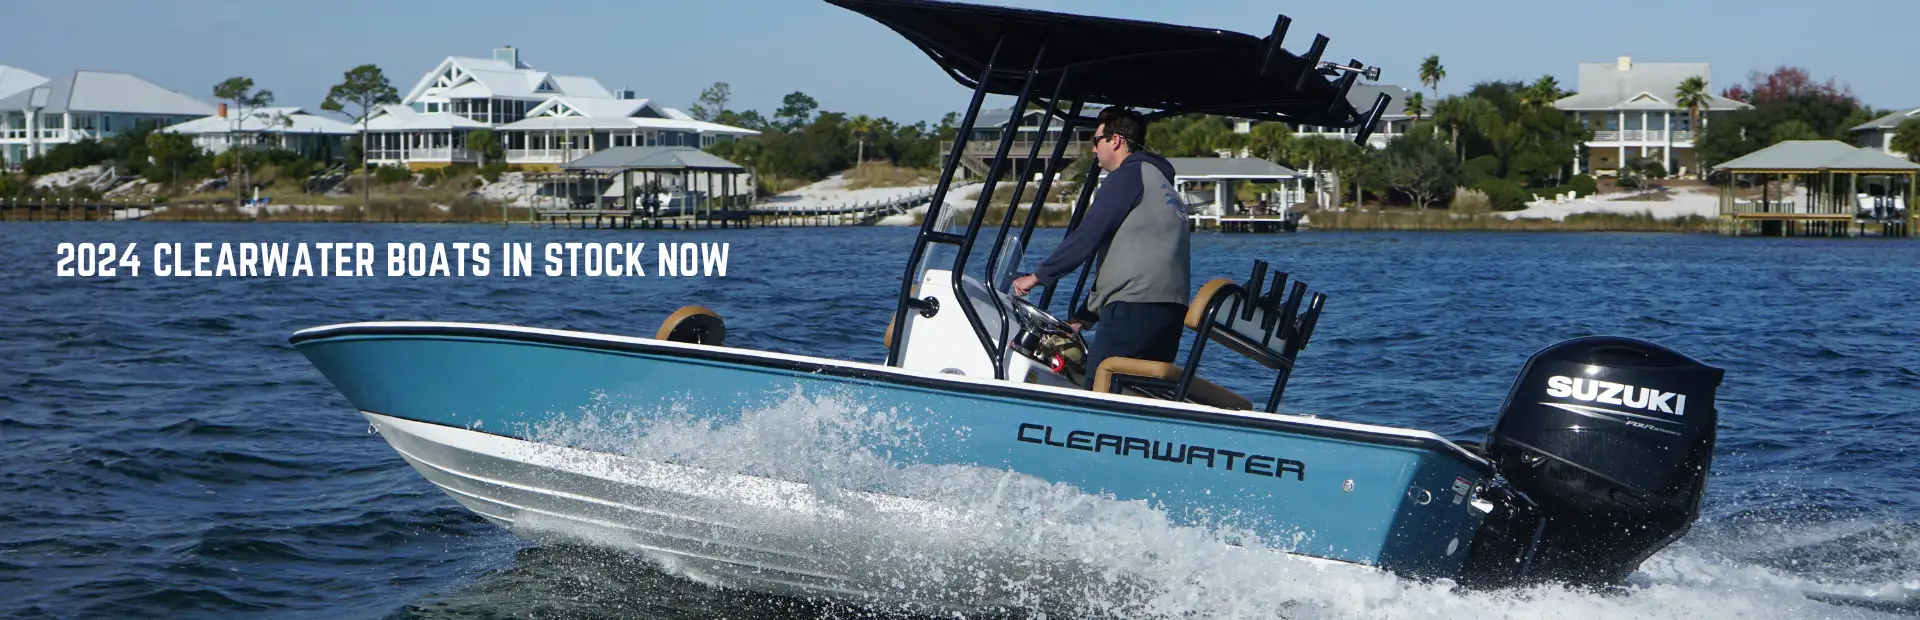 Clearwater Boats now in stock